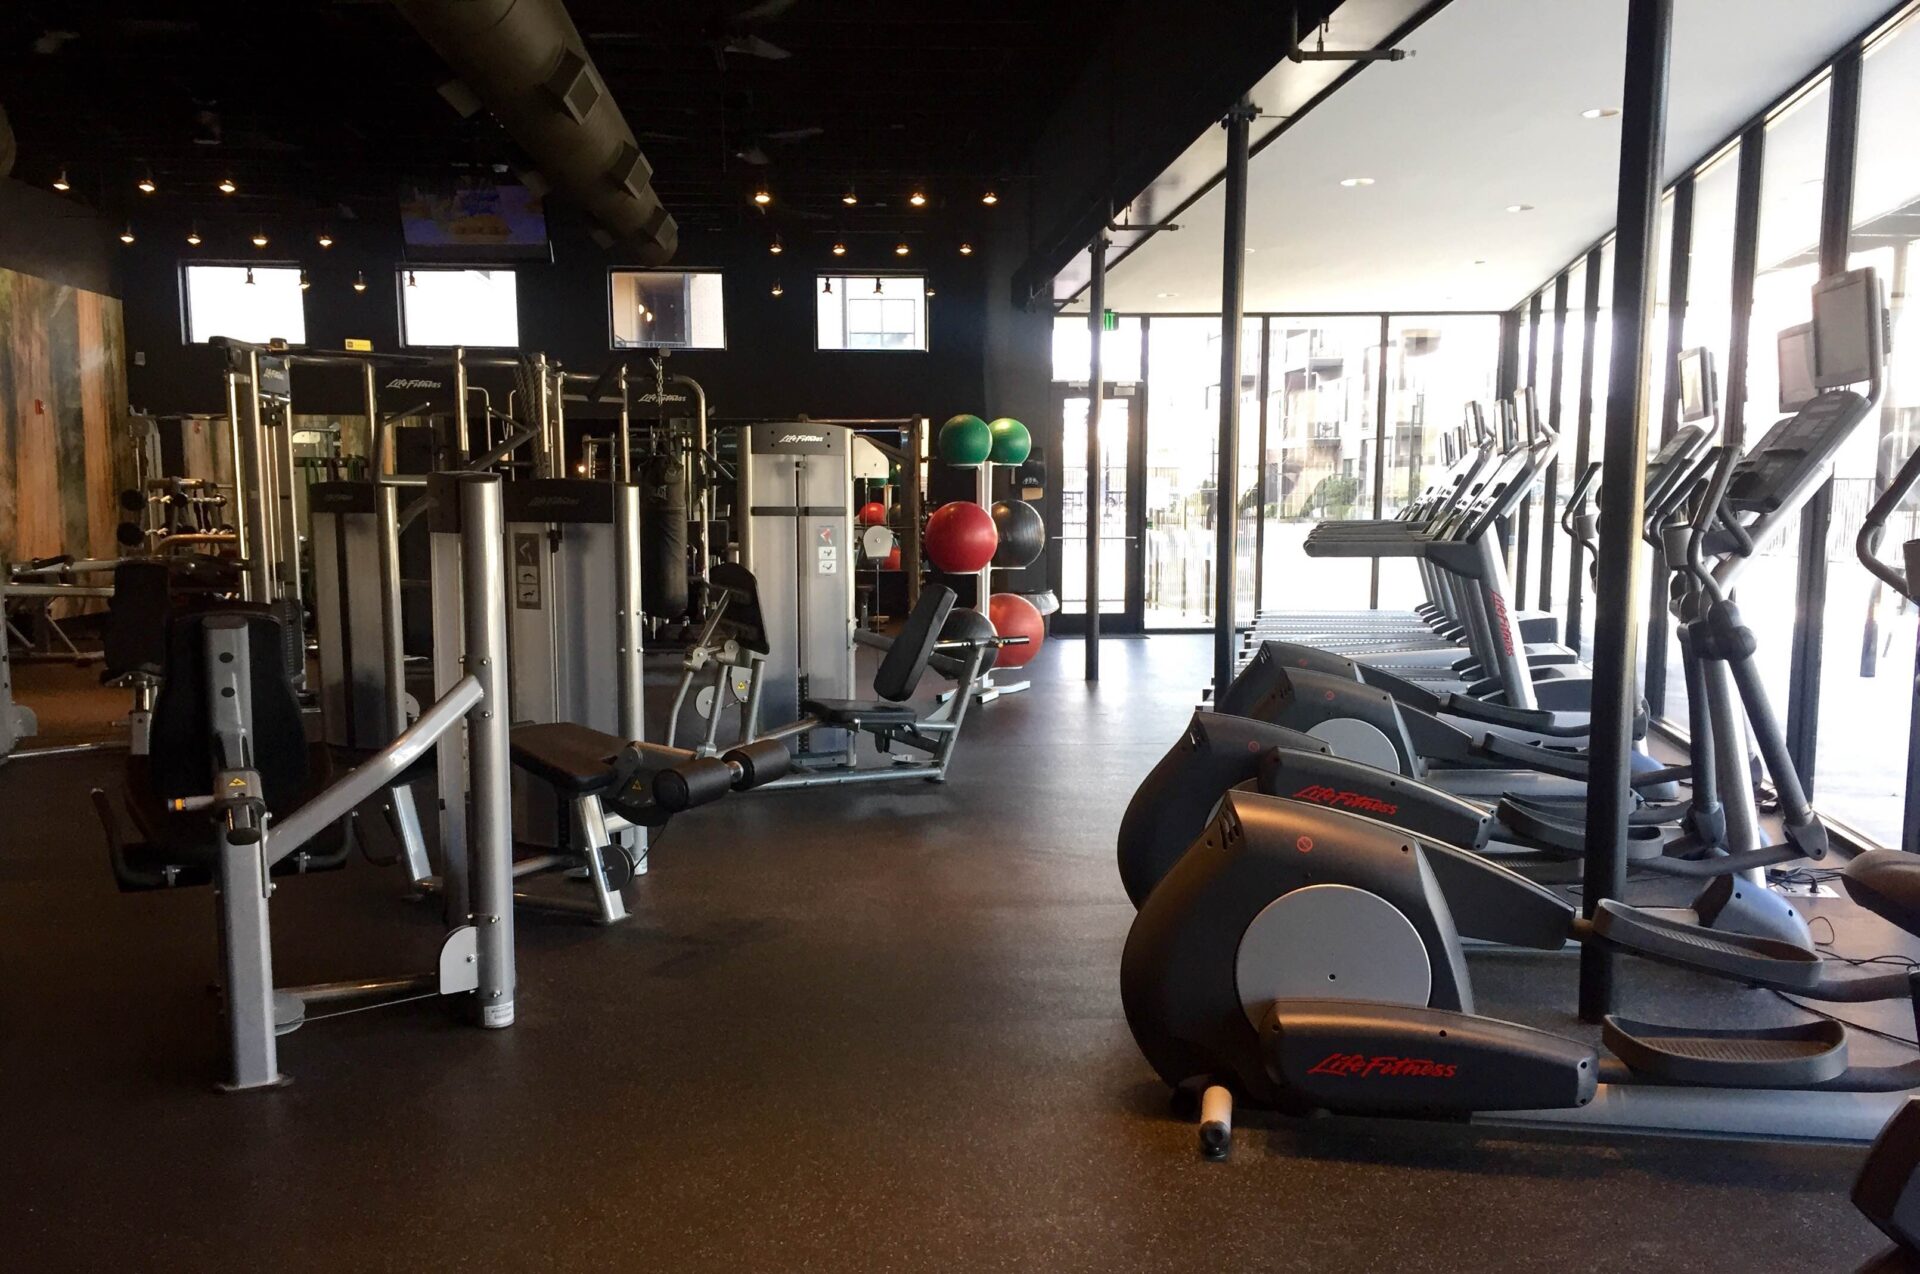 Hub Gym Sees Rise in Nonresident Use of Gym, Facilities